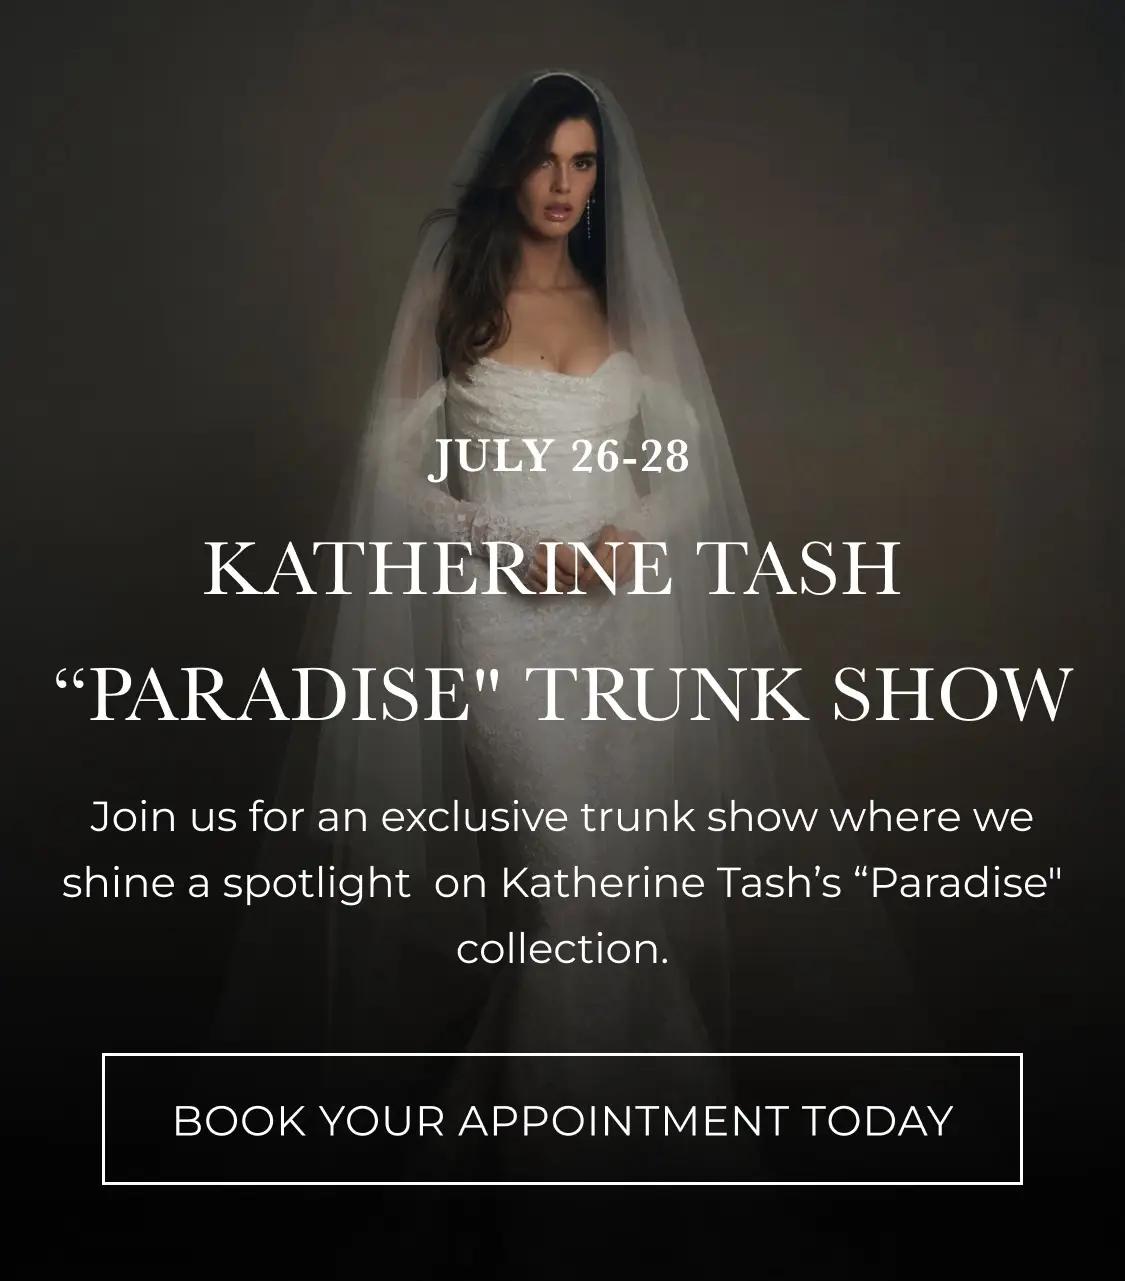 picture promoting katherine tash "paradise" collection trunk show evet